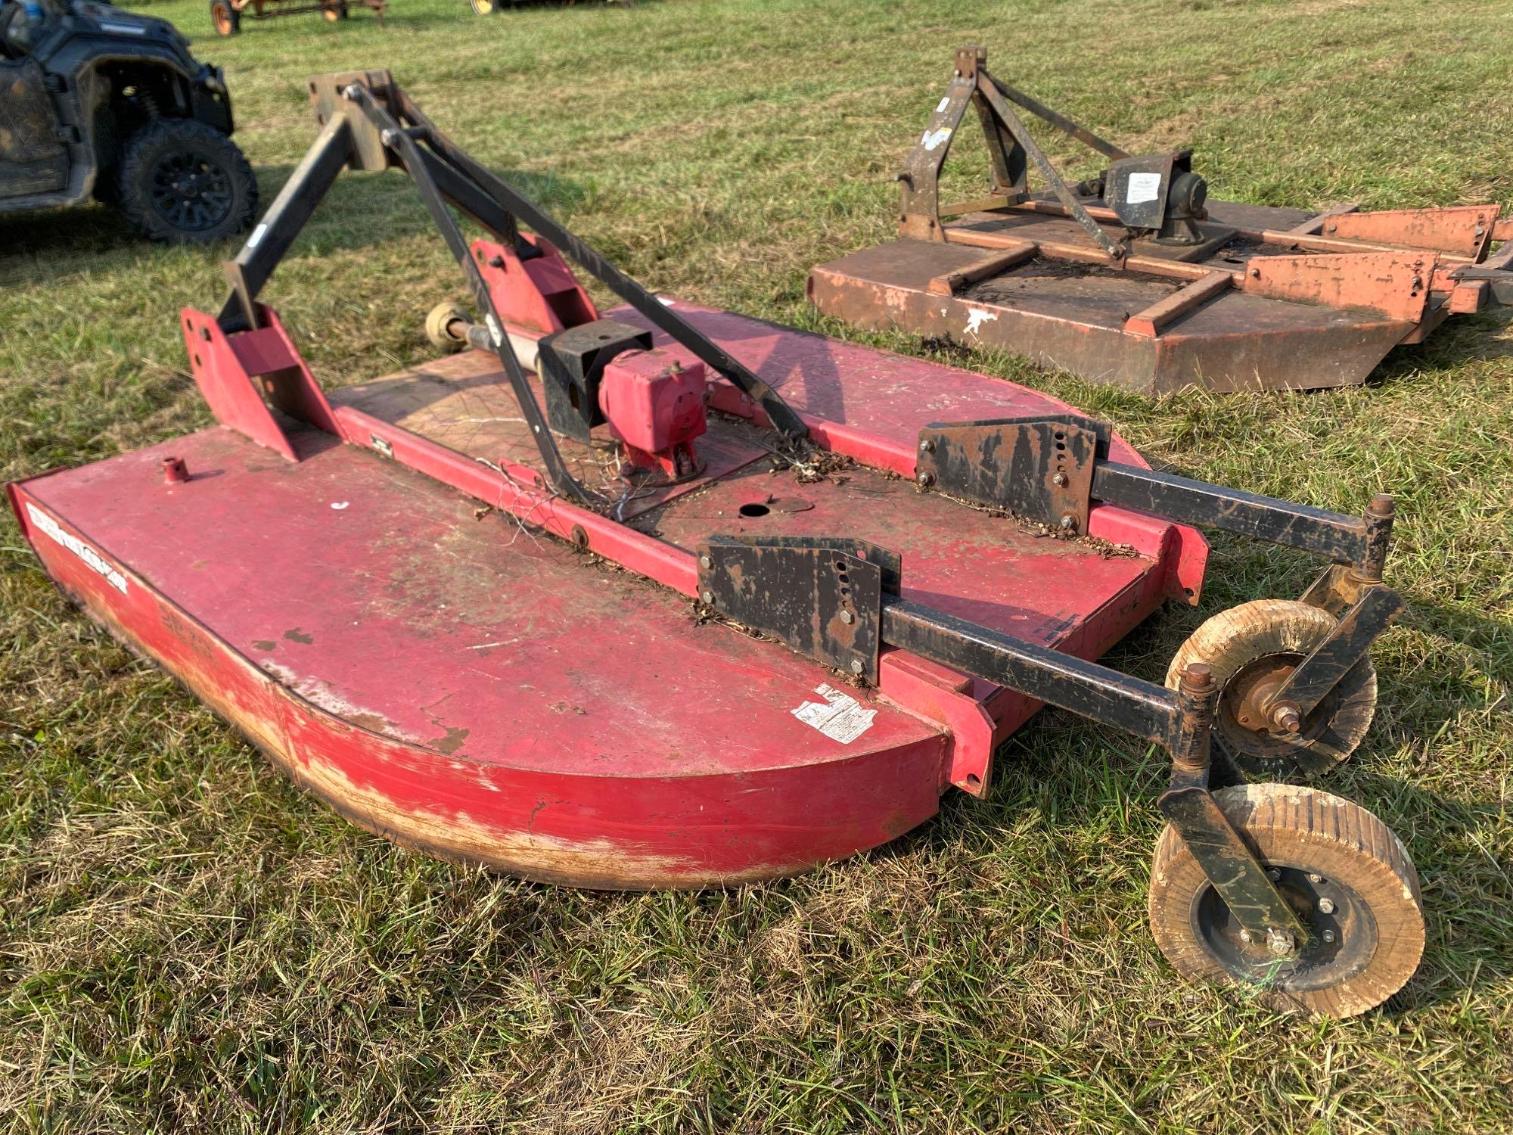 Image for Massey Ferguson Taylor Way 7’ Rotary Cutter, per seller- works as it should